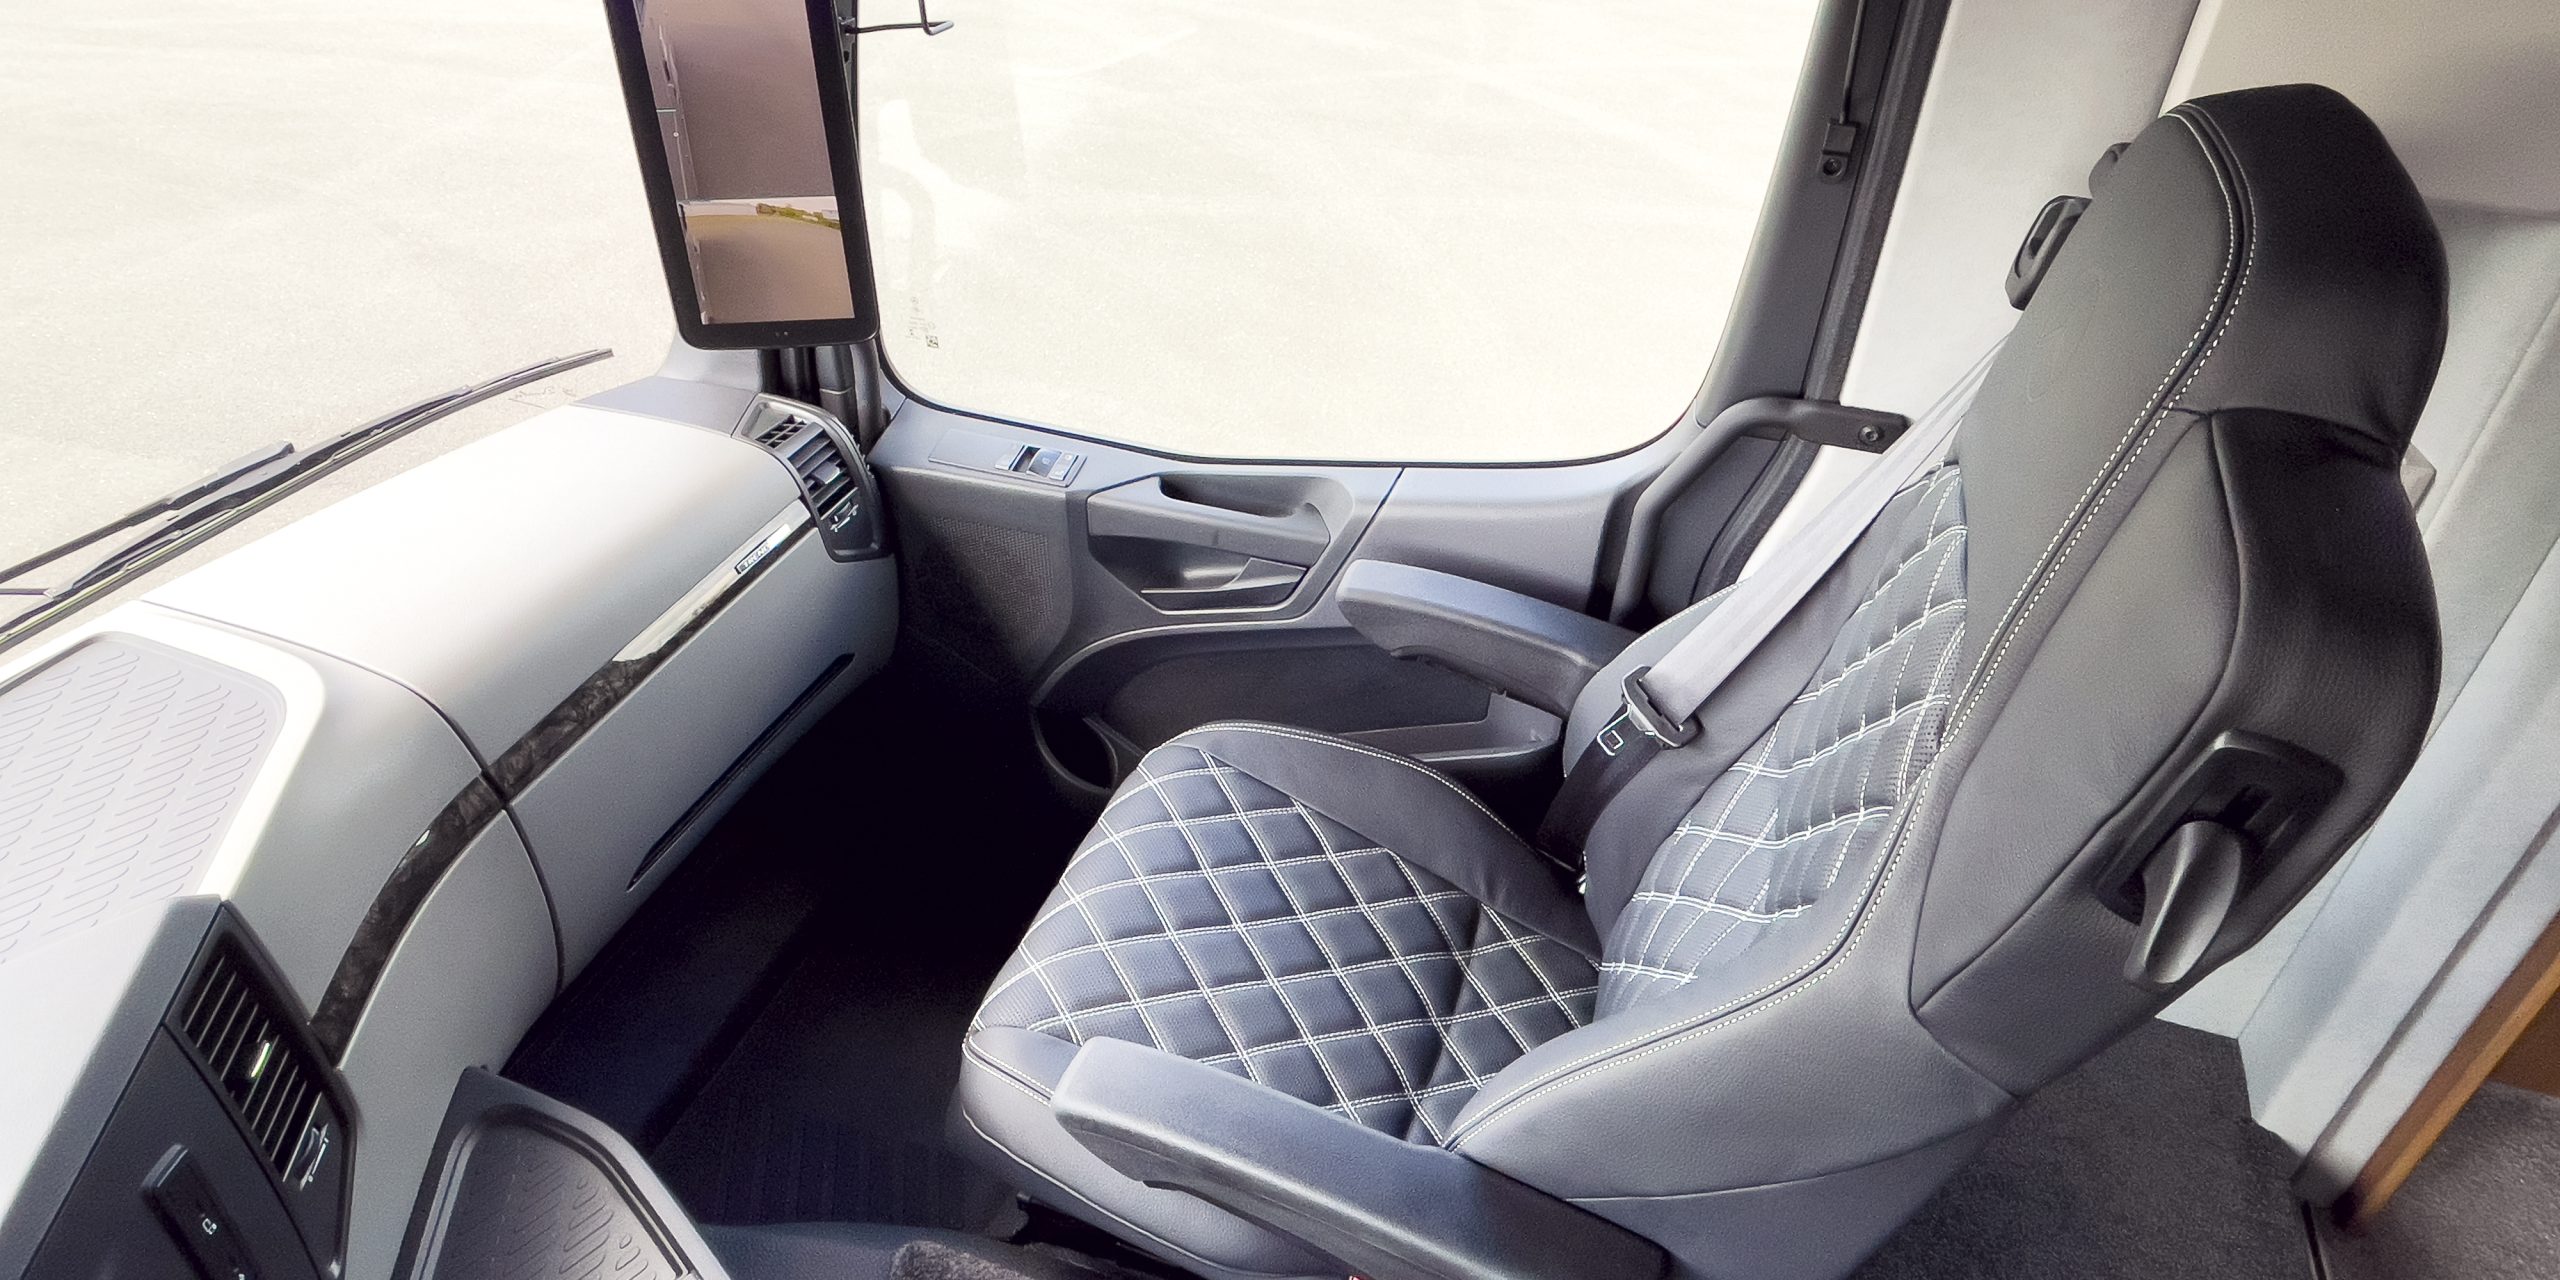 Comfortable and air-conditioned leather cab seats | varioTRENDLINE